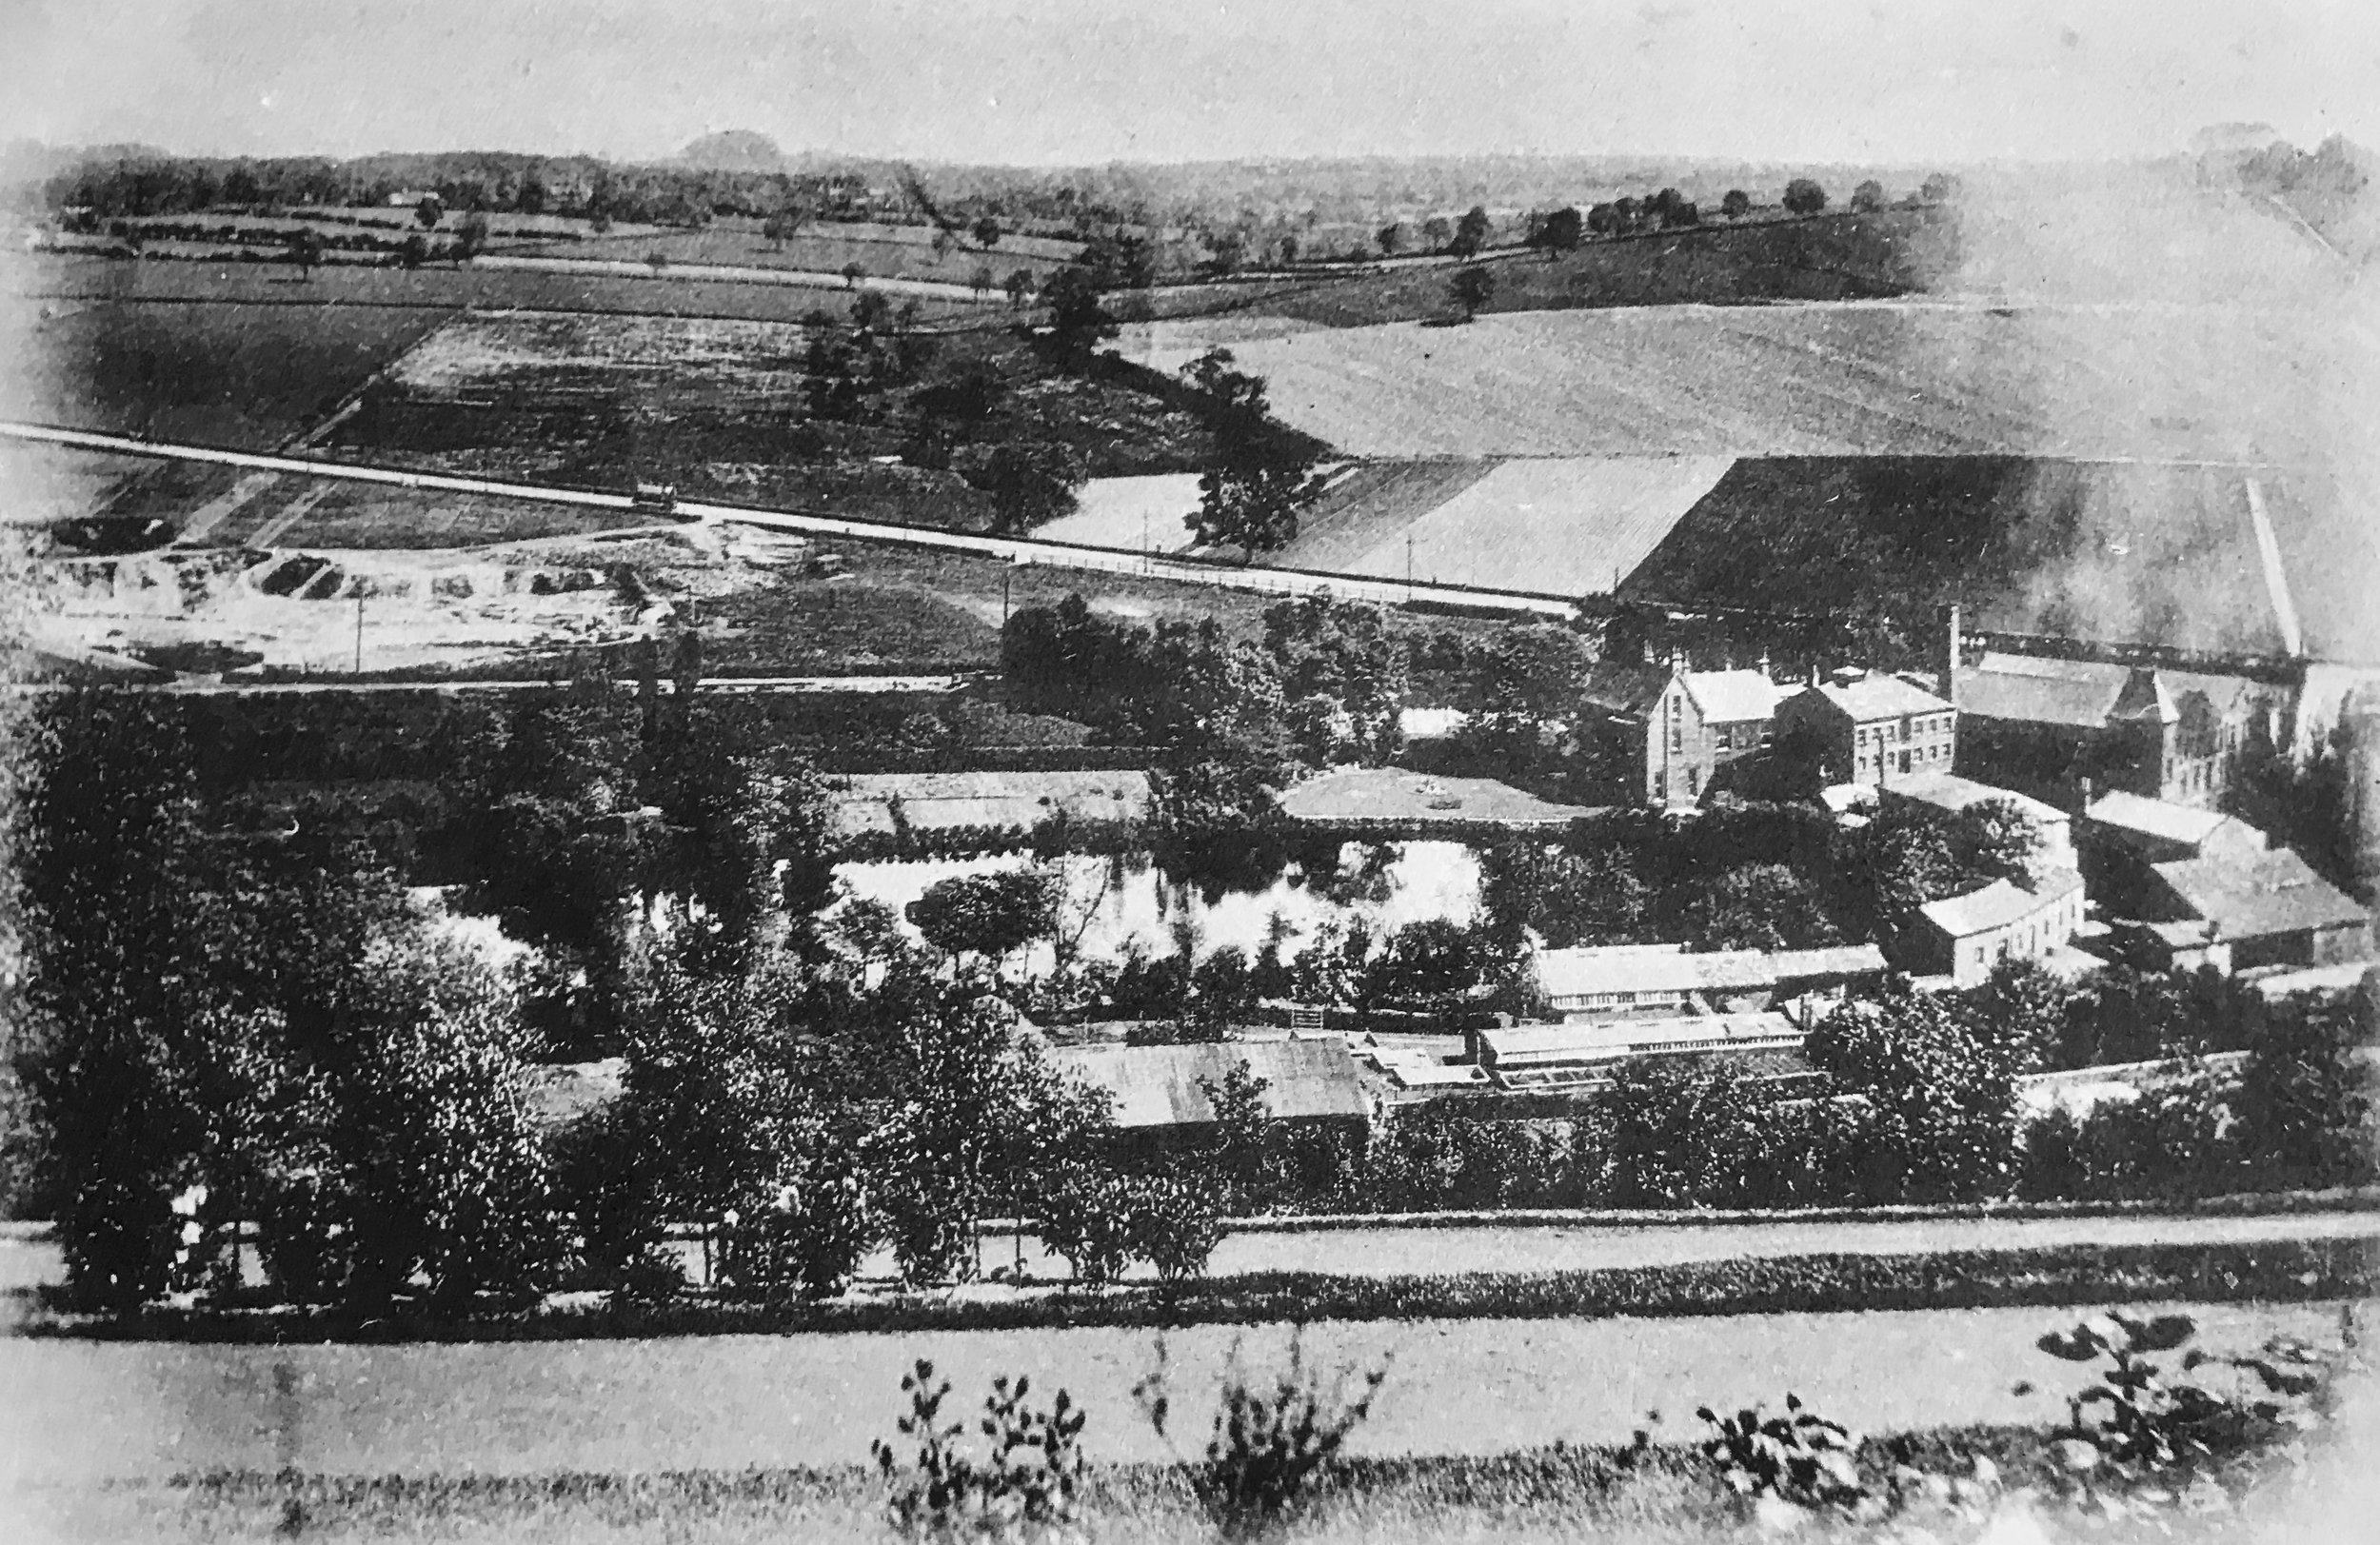 Groves Mill and Pond [demolished], circa 1890